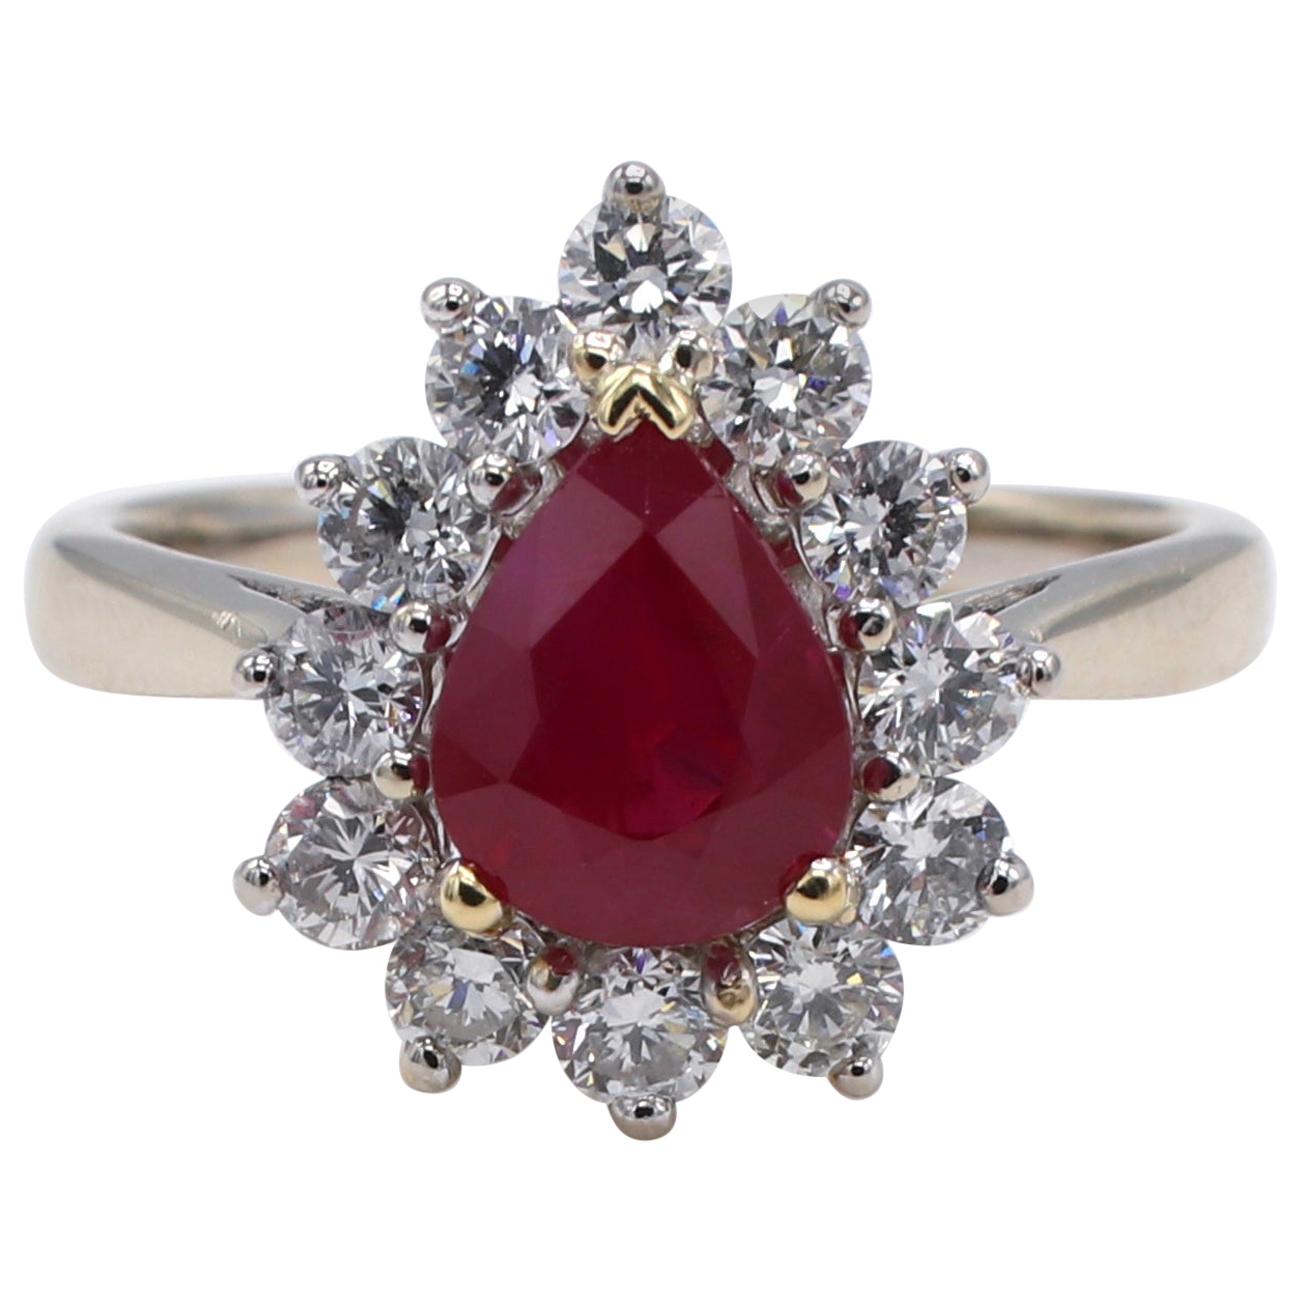 GIA Certified 1.76 Carat Burma Ruby and Diamond Halo Cocktail Ring